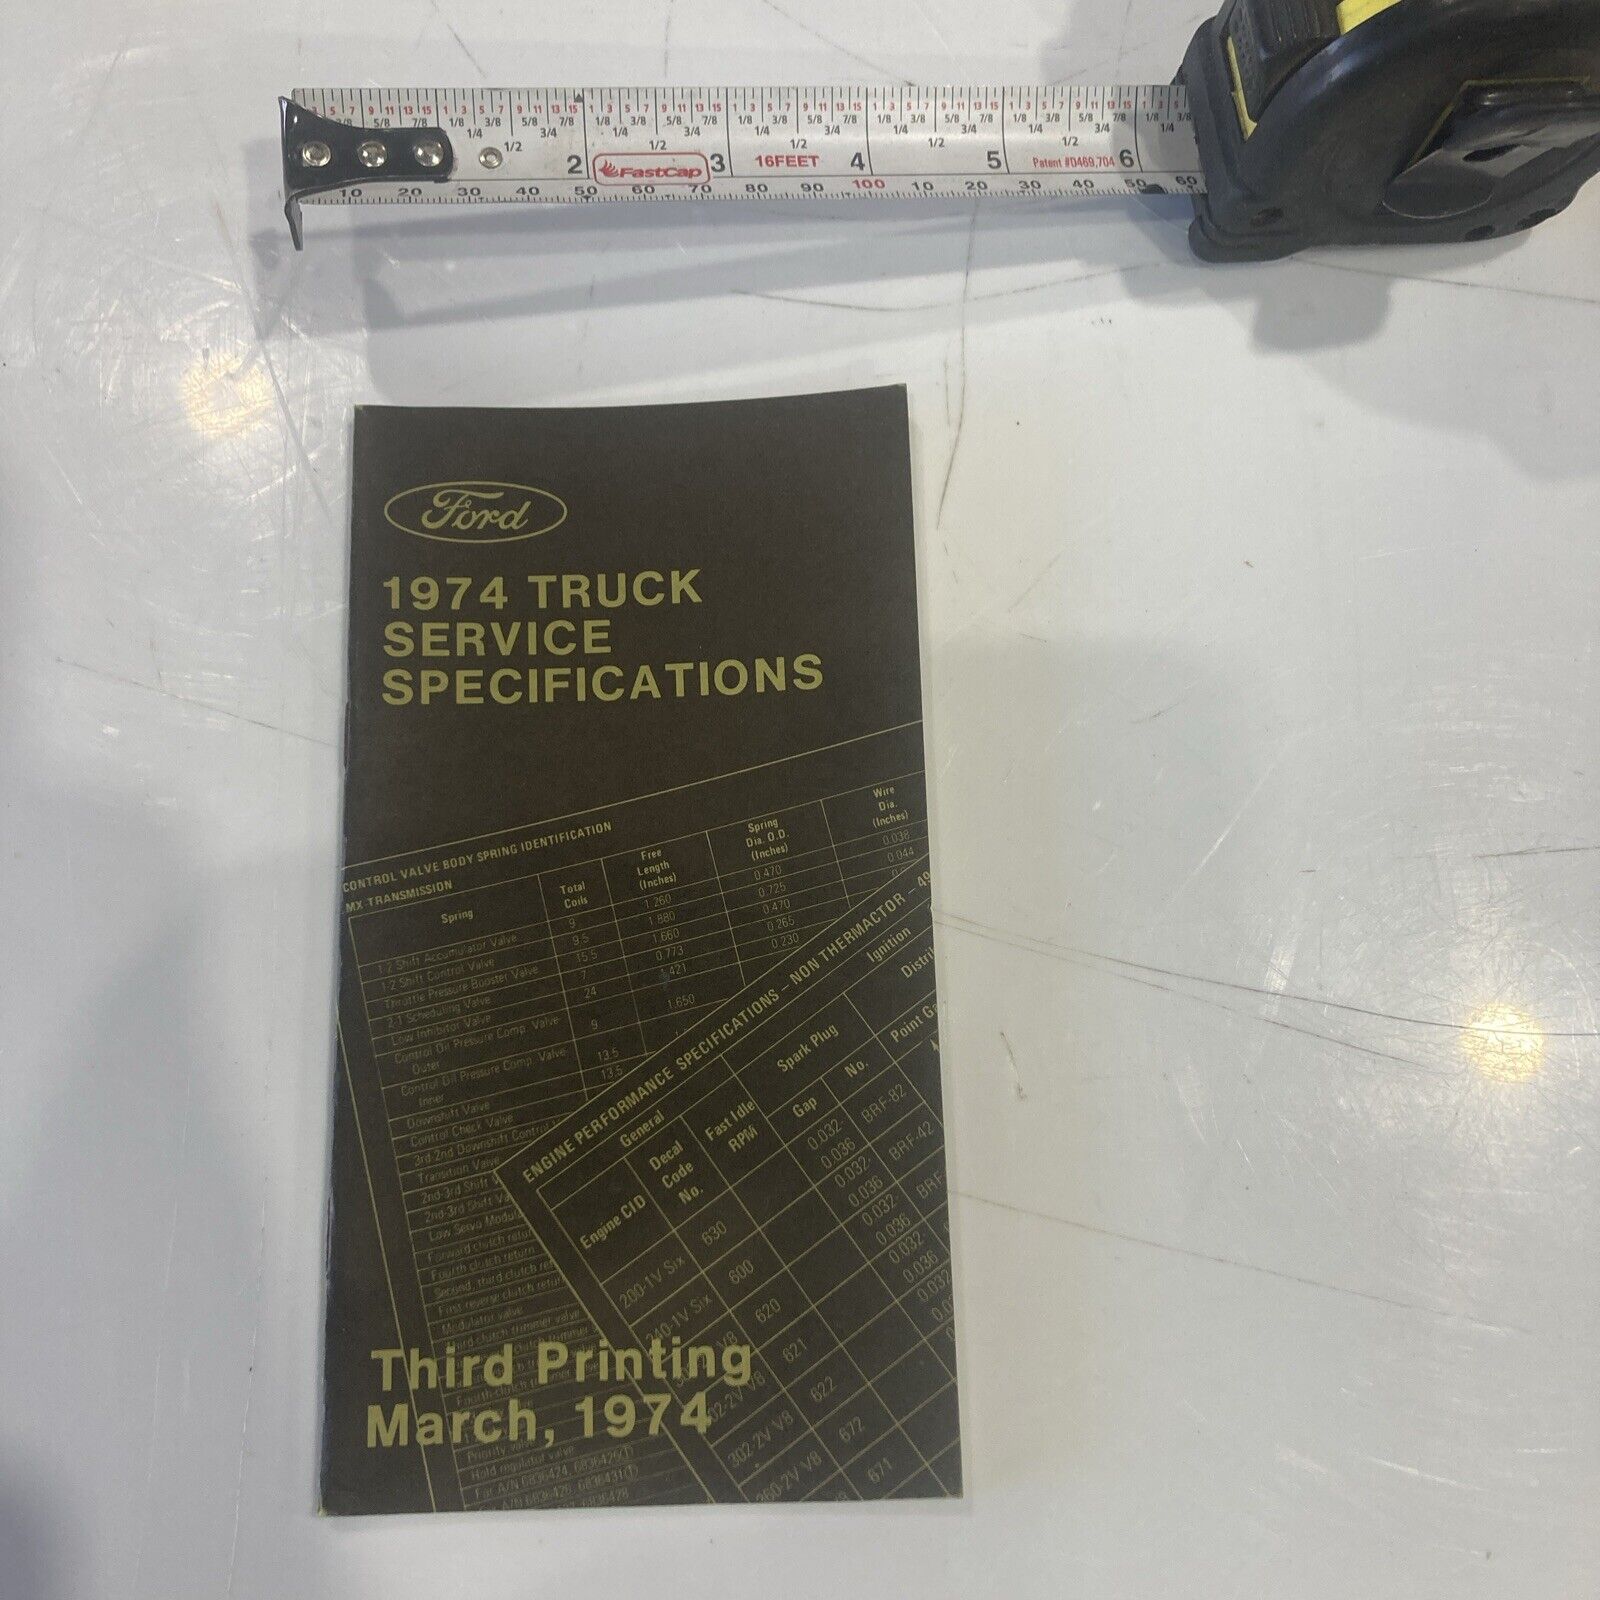 Vintage 1974 Ford Truck Service Specifications